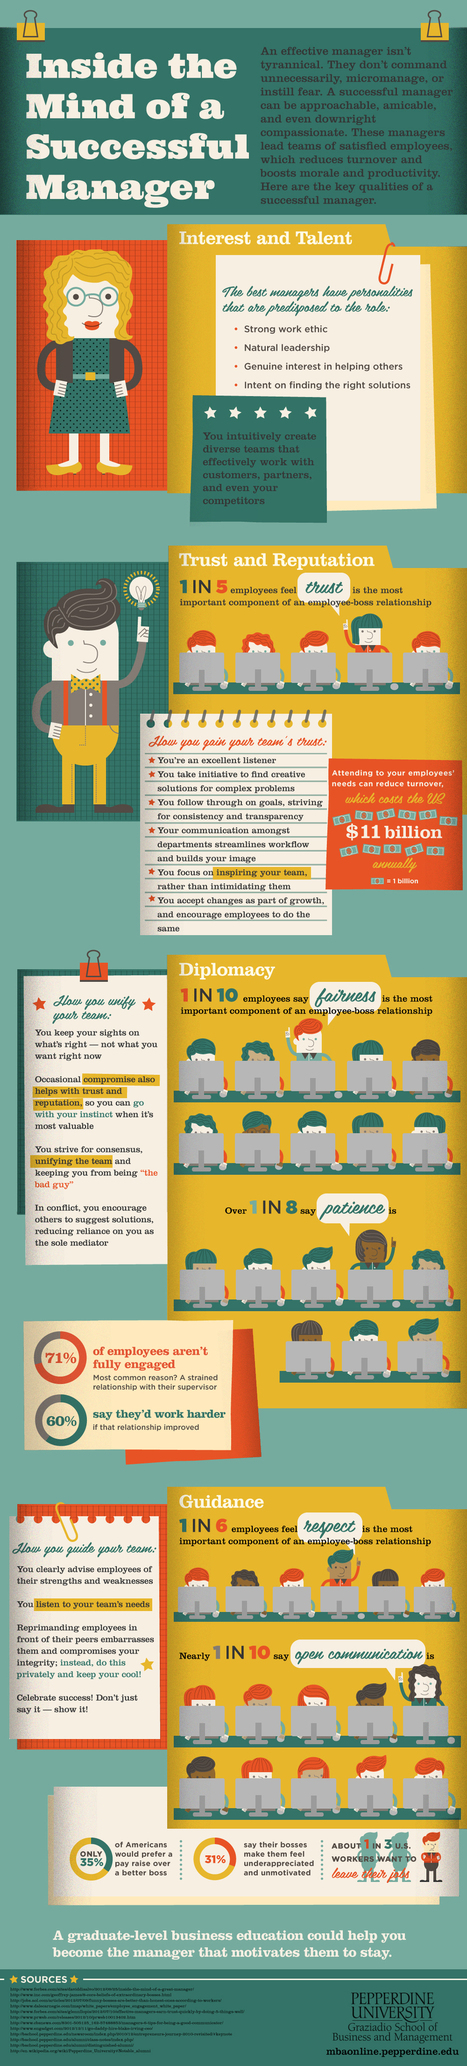 (Infographic) What Makes a Successful Manager? | A New Society, a new education! | Scoop.it